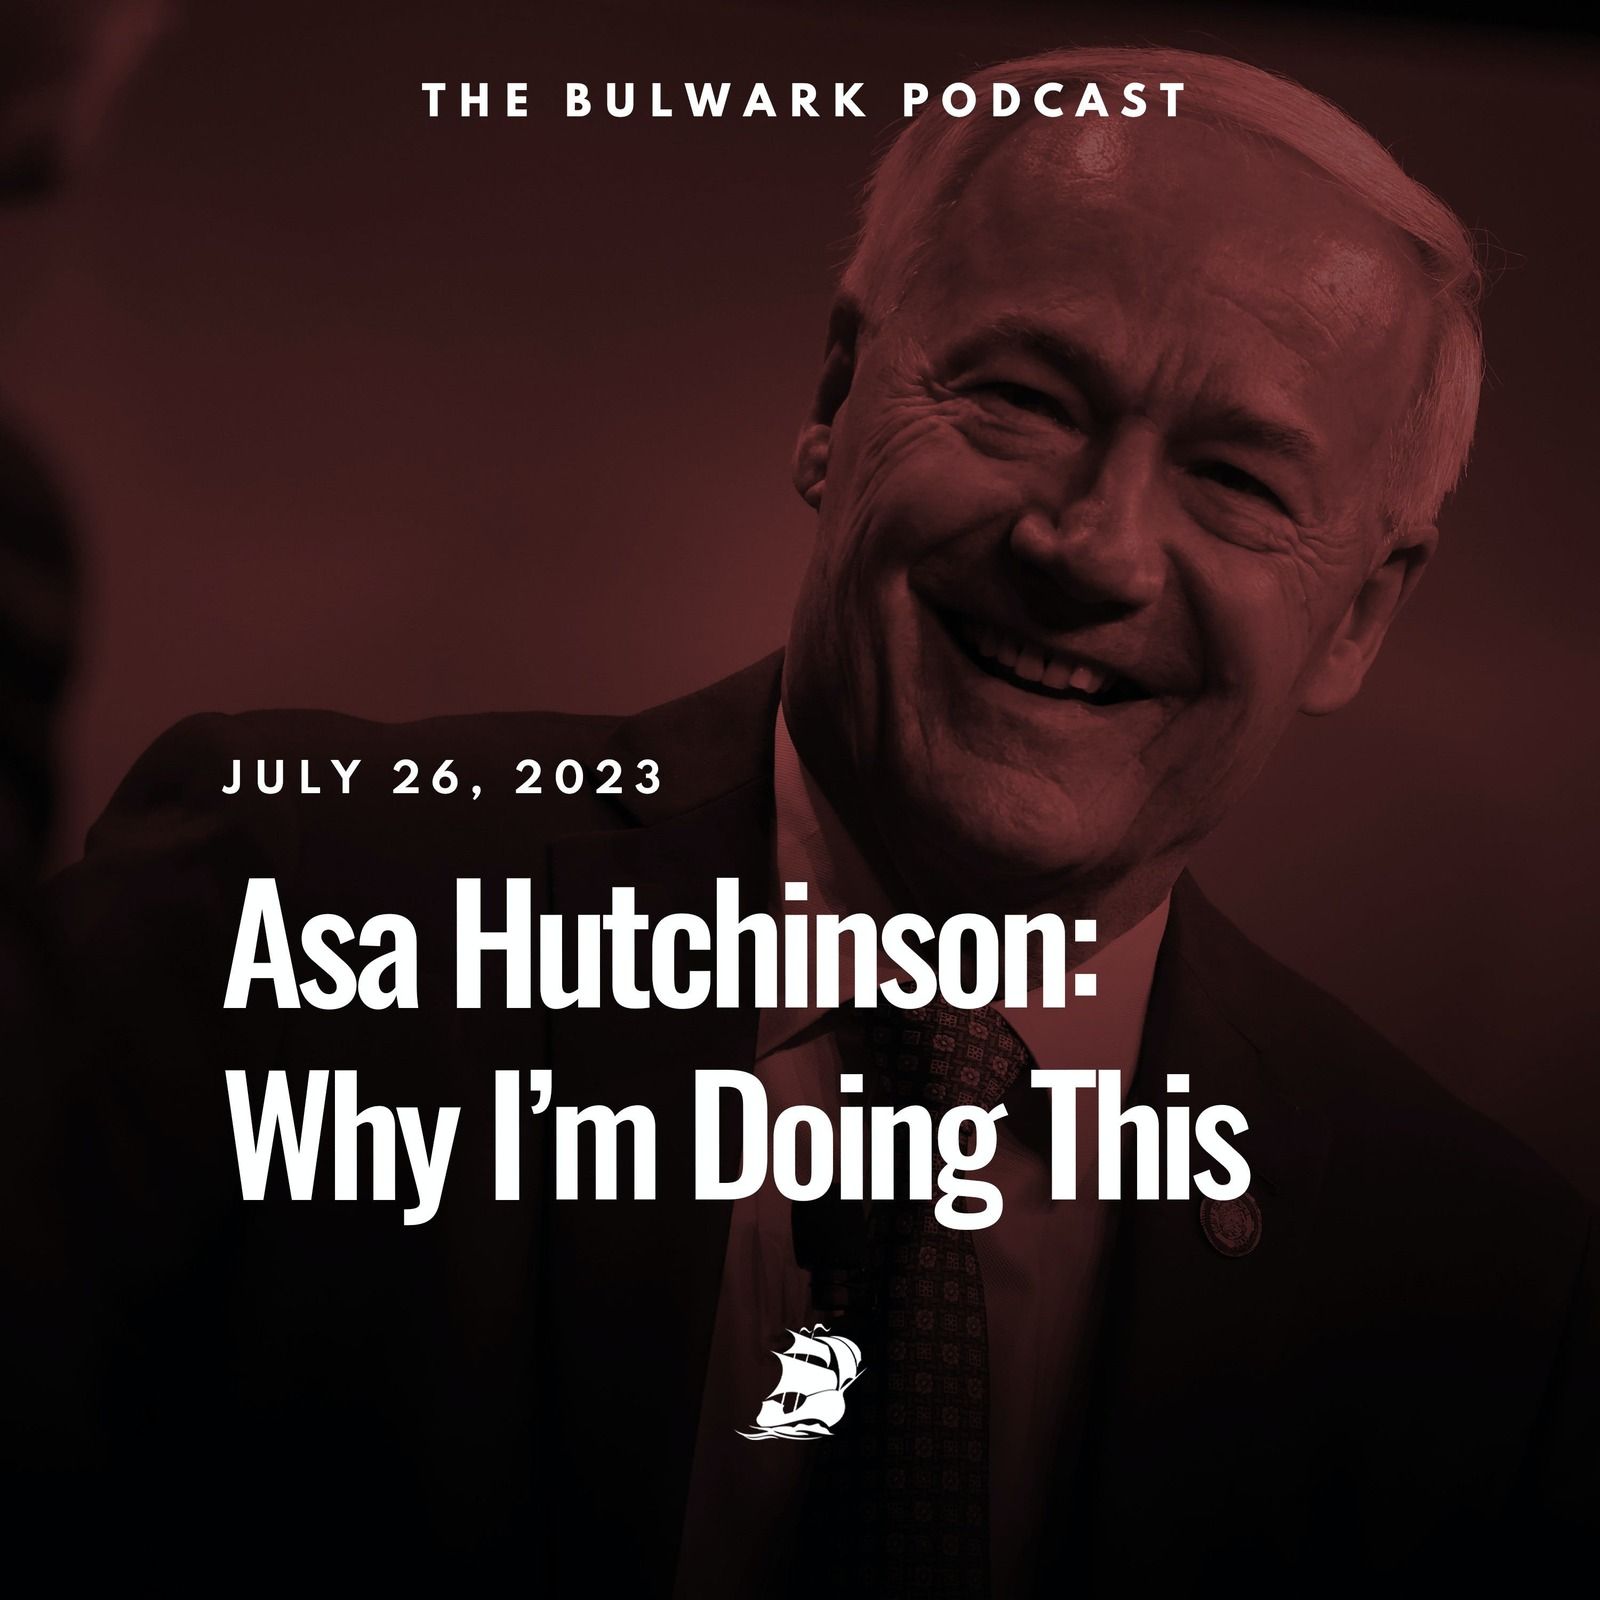 Asa Hutchinson: Why I’m Doing This by The Bulwark Podcast